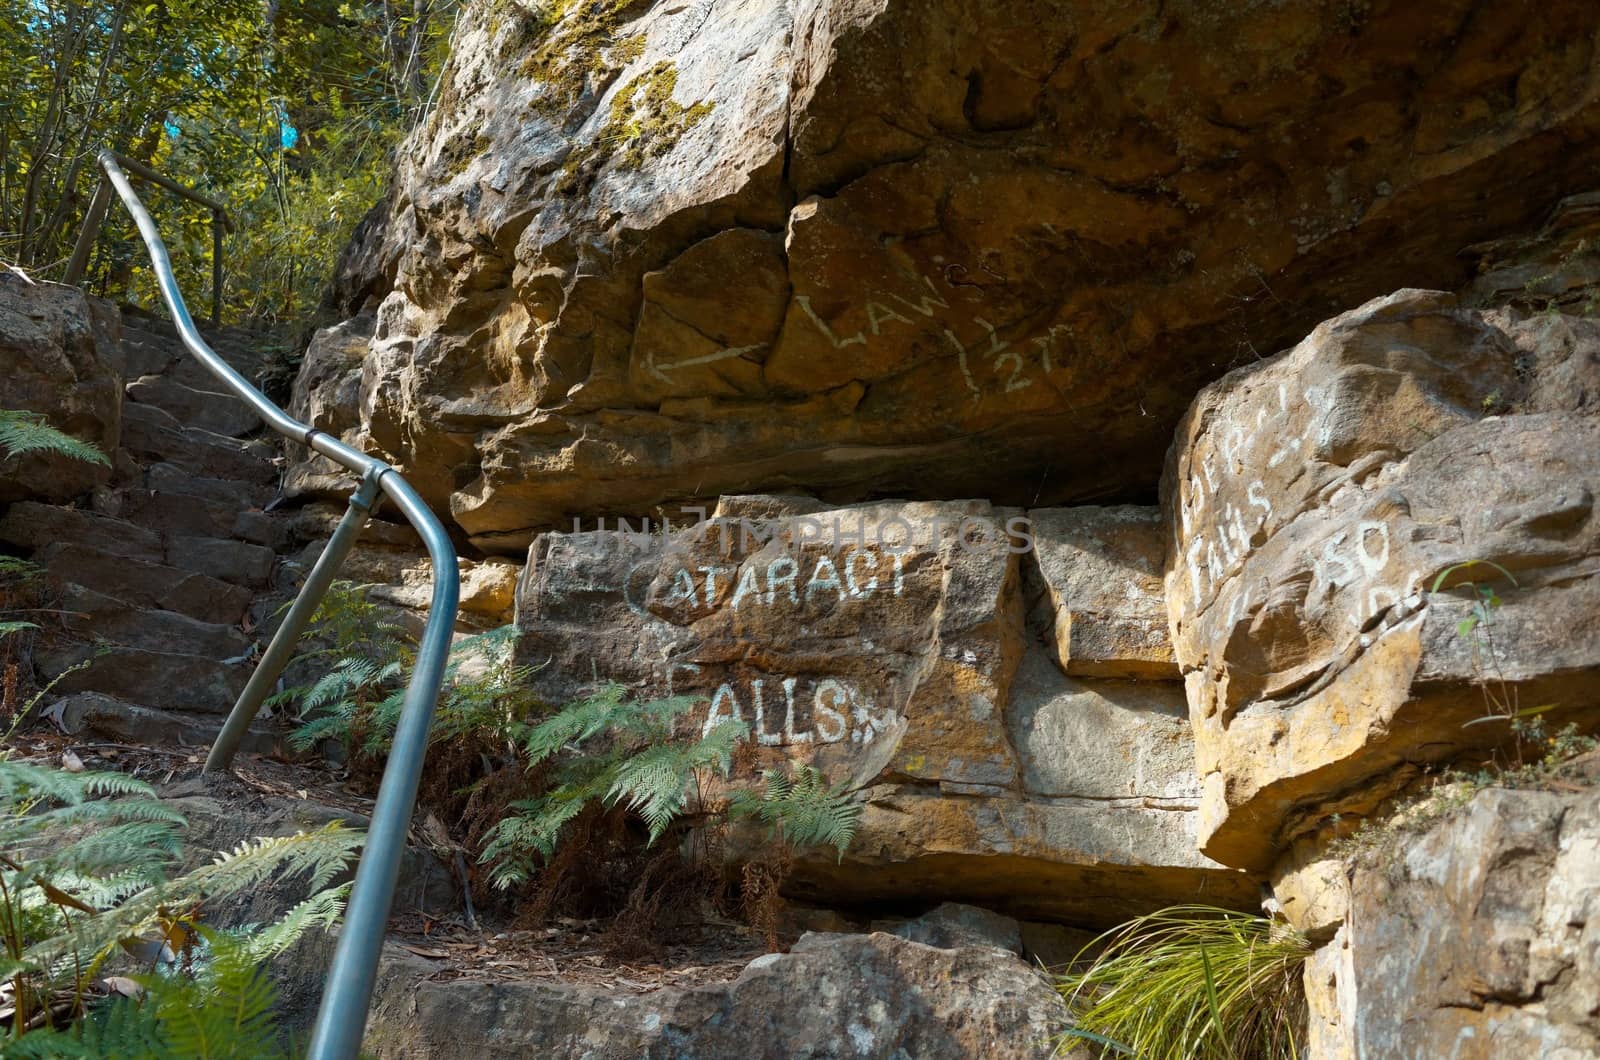 Stones steps on the side of a rock with painted direction signs in the Blue Mountains of Australia.